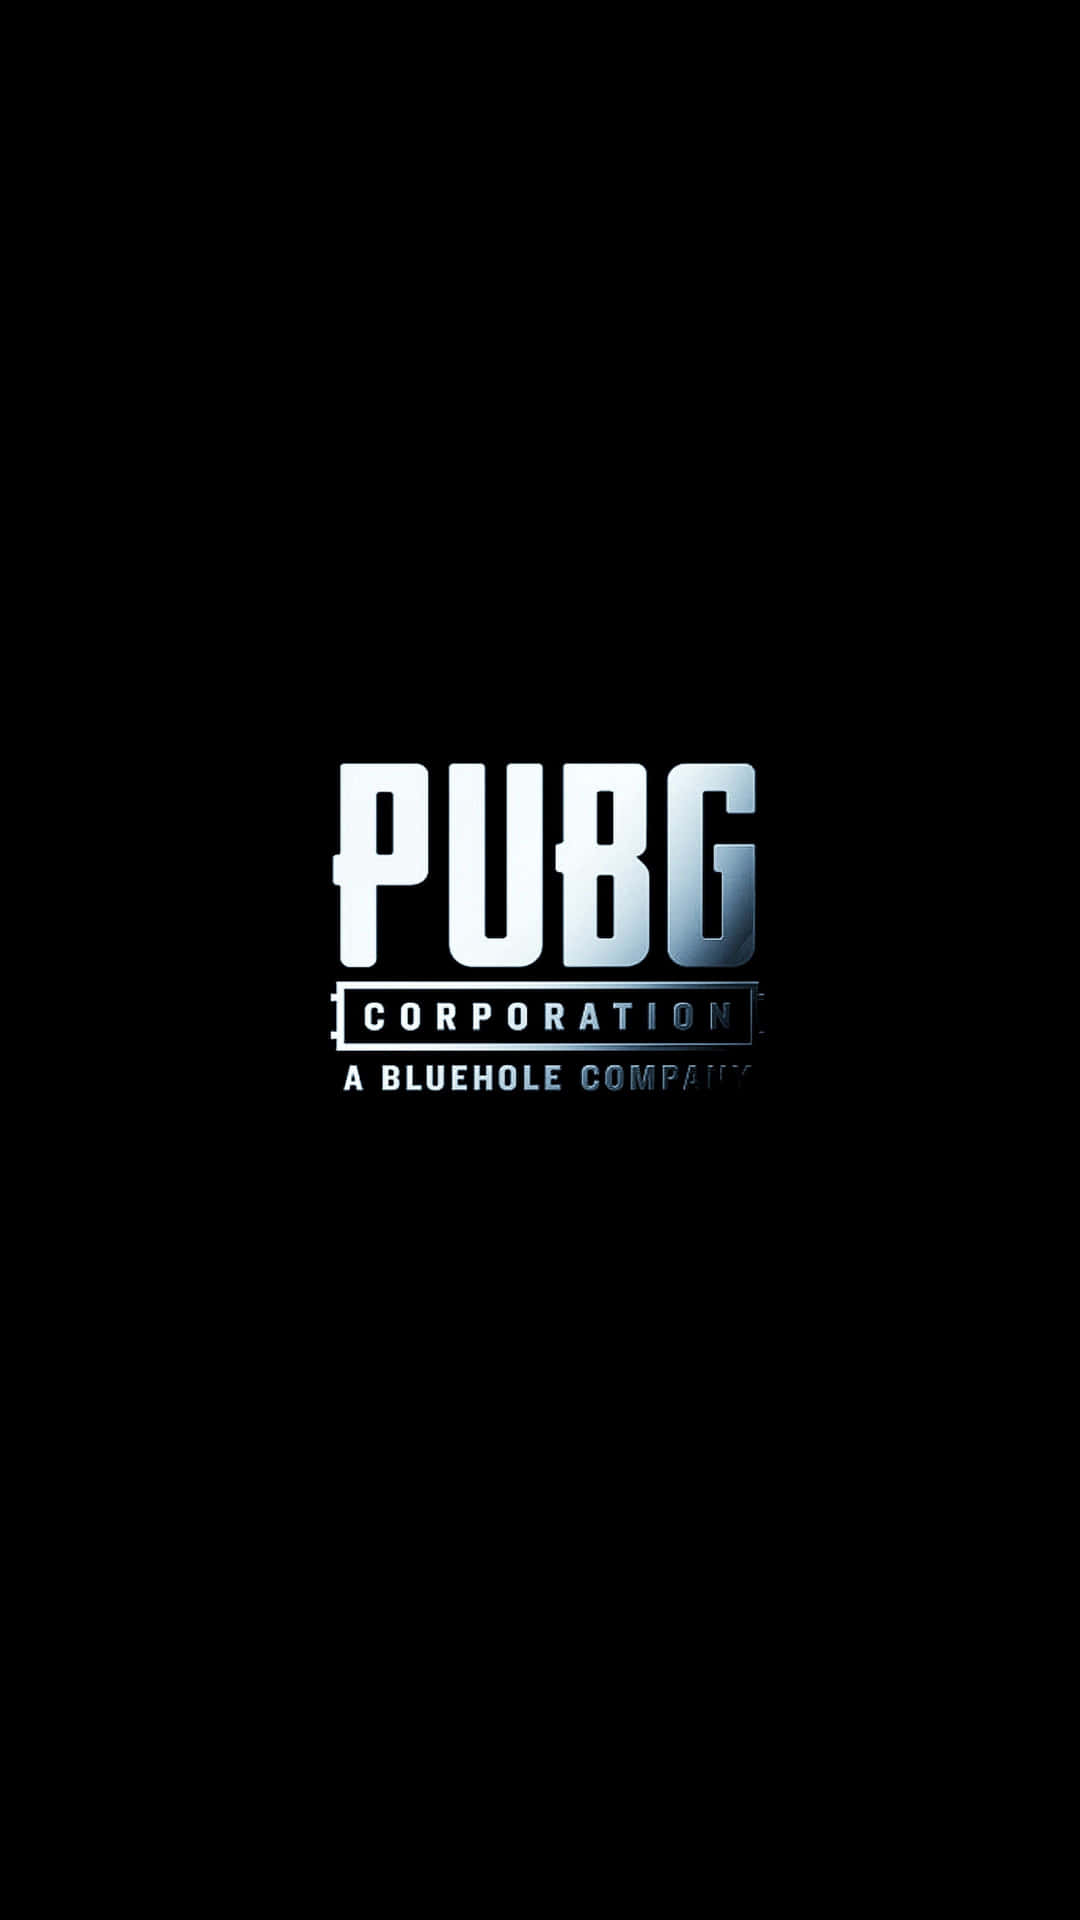 The Logo For Pubg Corporation On A Black Background Wallpaper